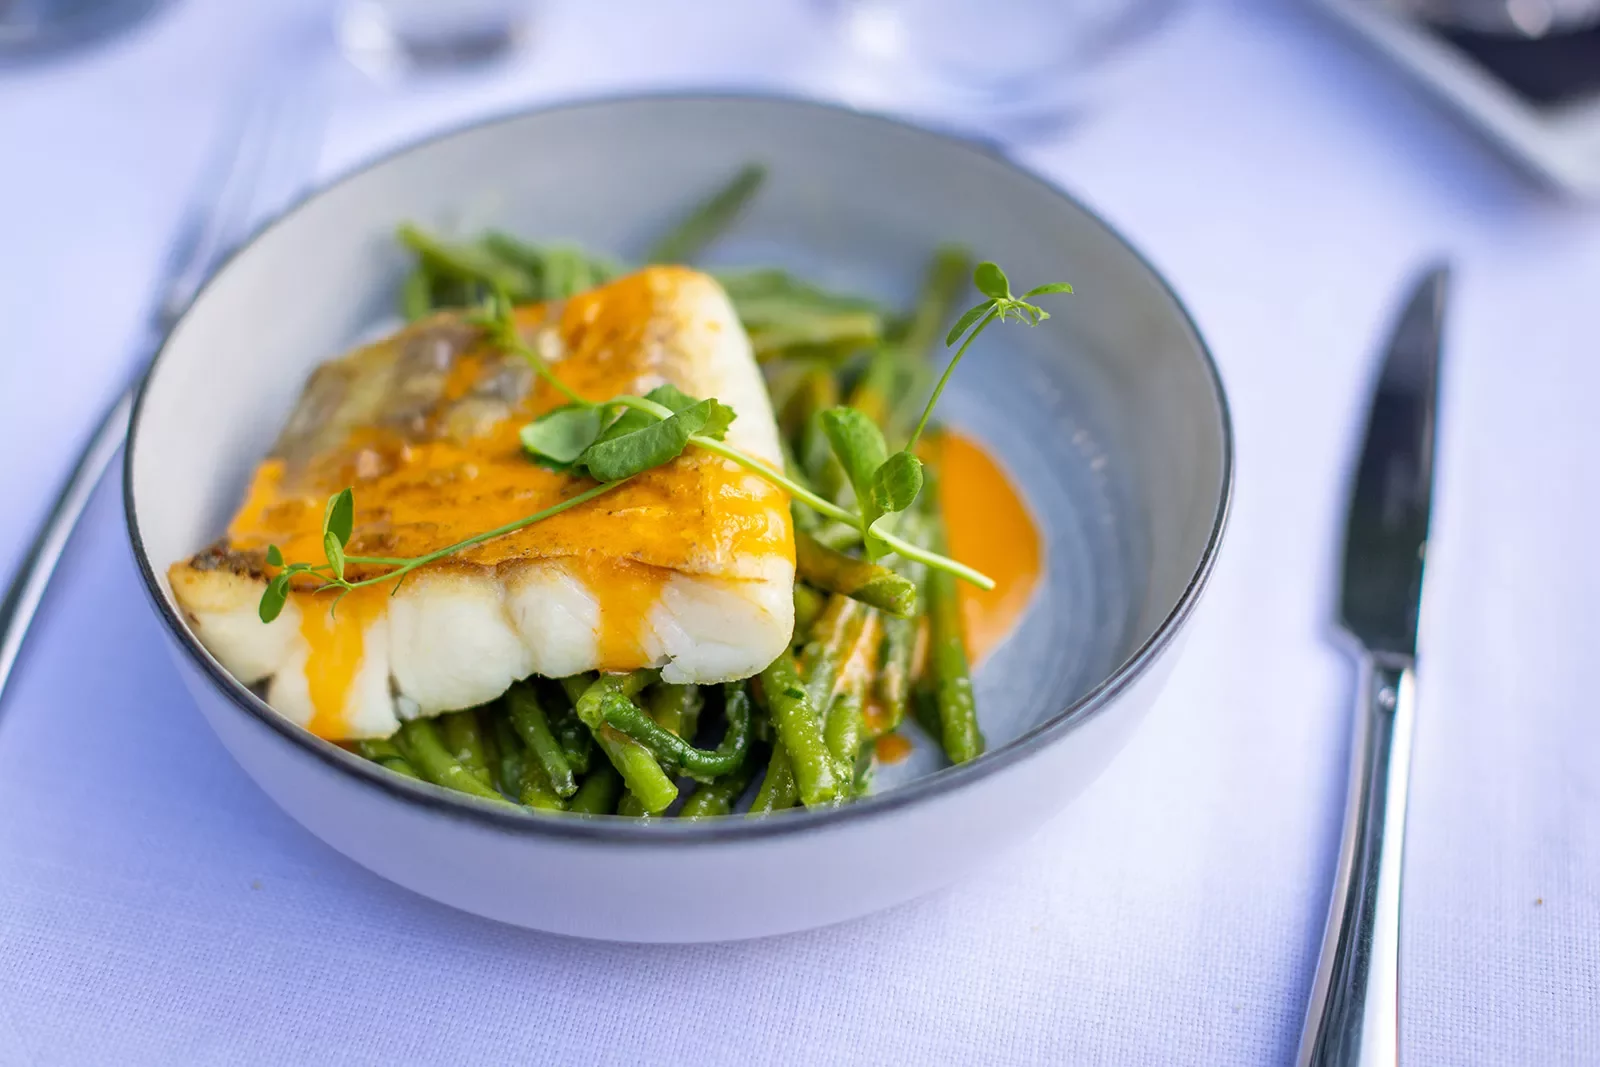 Plate of pan fried fish with an orange sauce, bed of greens.